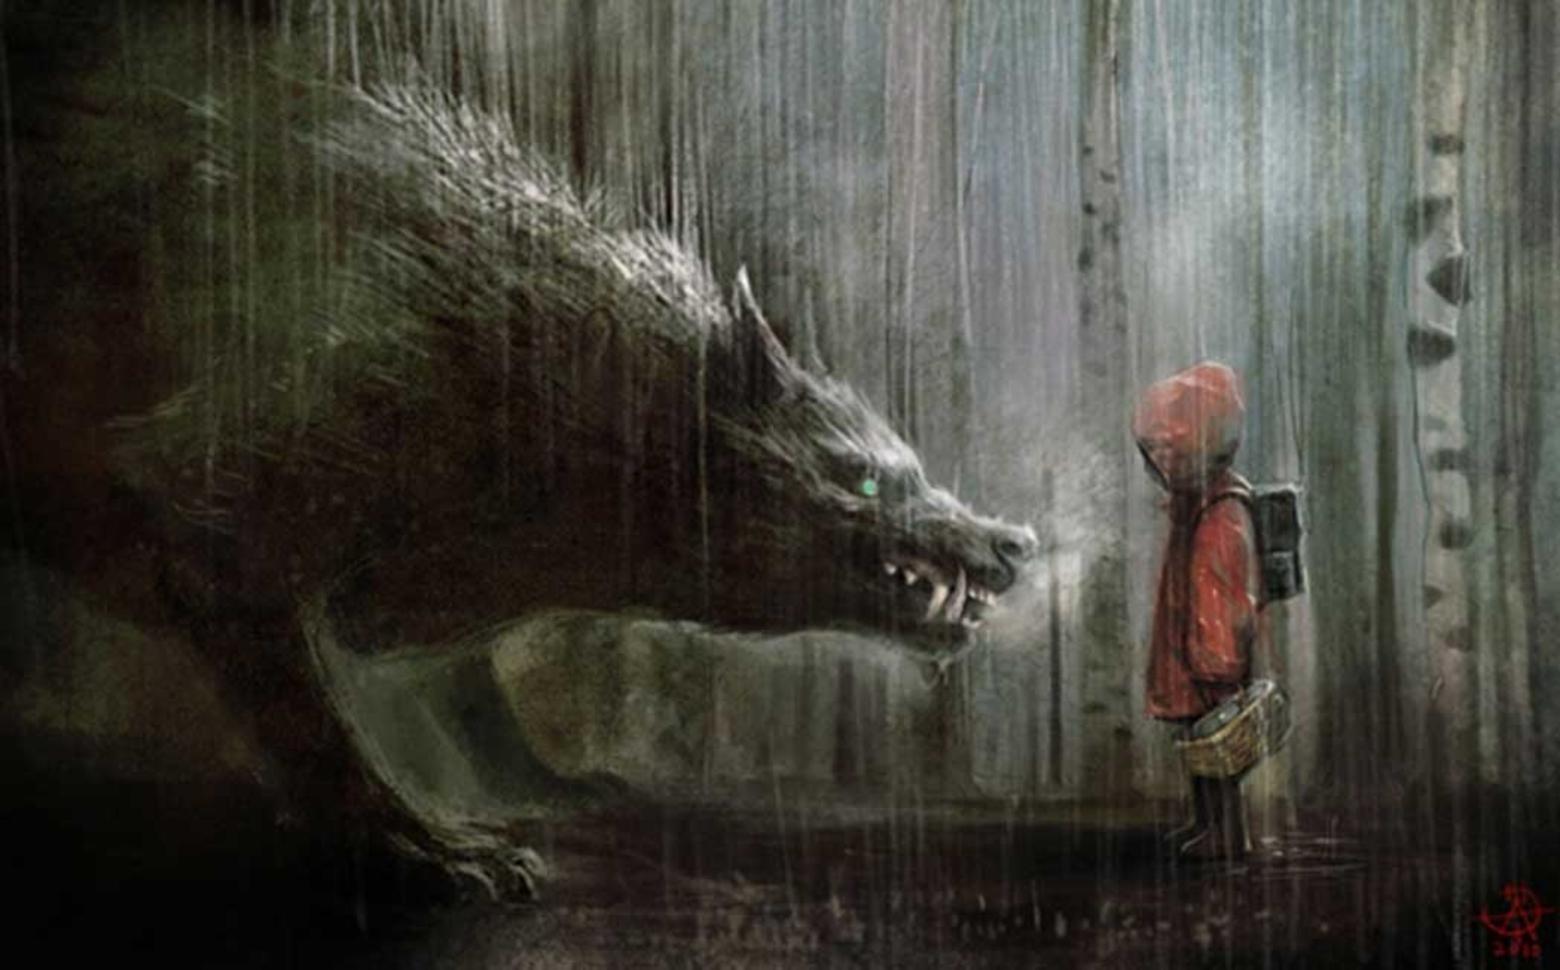 Illustrated stereotypes such as this of the Big Bad Wolf and Little Red Riding Hood have long contributed to a fear of nature called biophobia. 